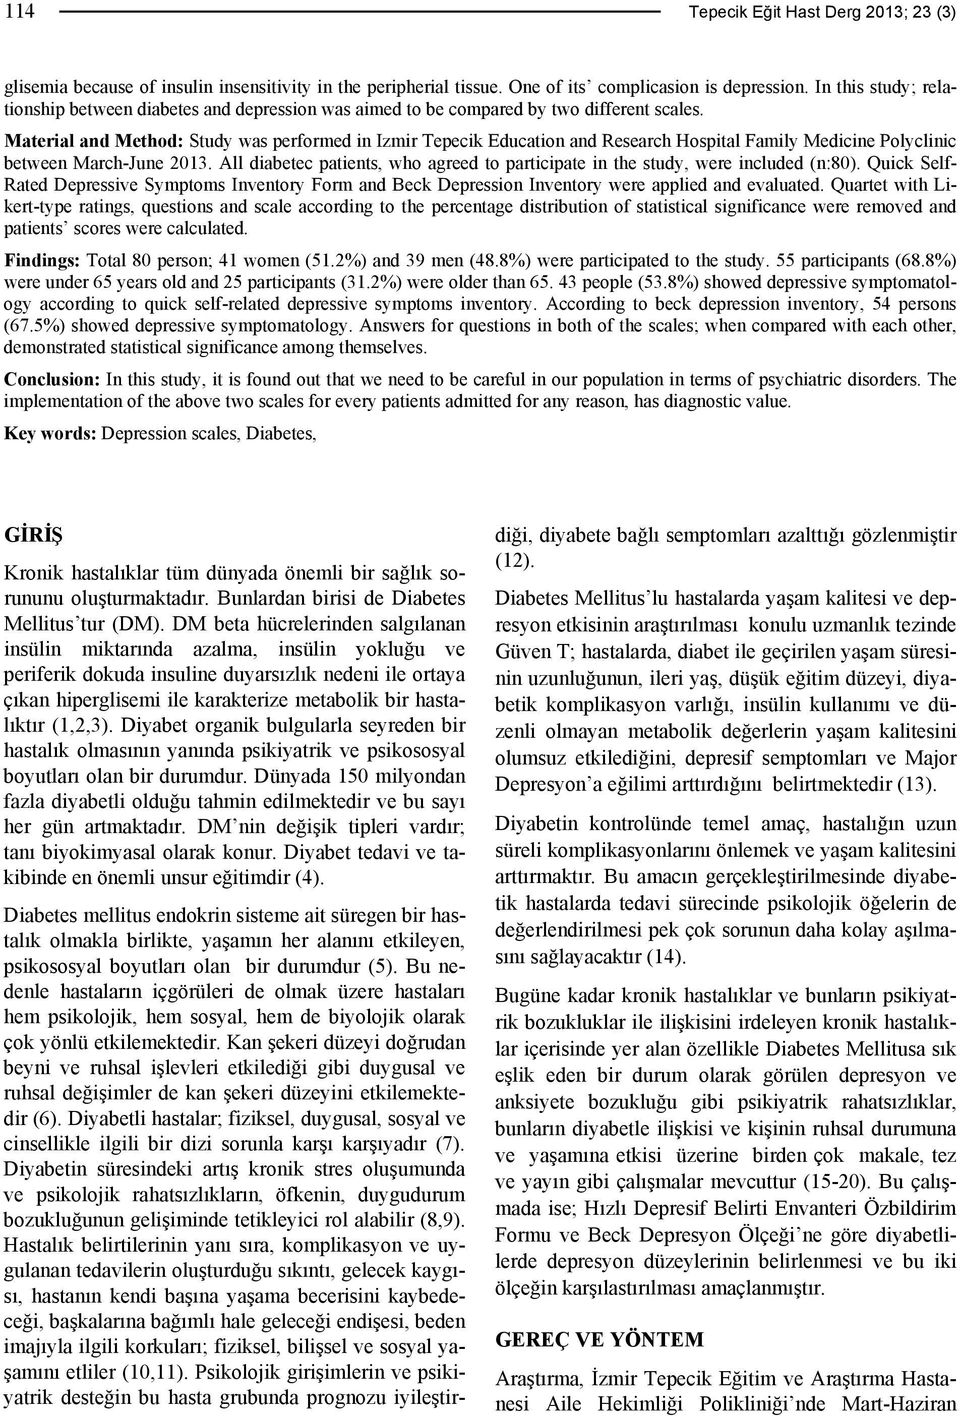 Material and Method: Study was performed in Izmir Tepecik Education and Research Hospital Family Medicine Polyclinic between March-June 2013.